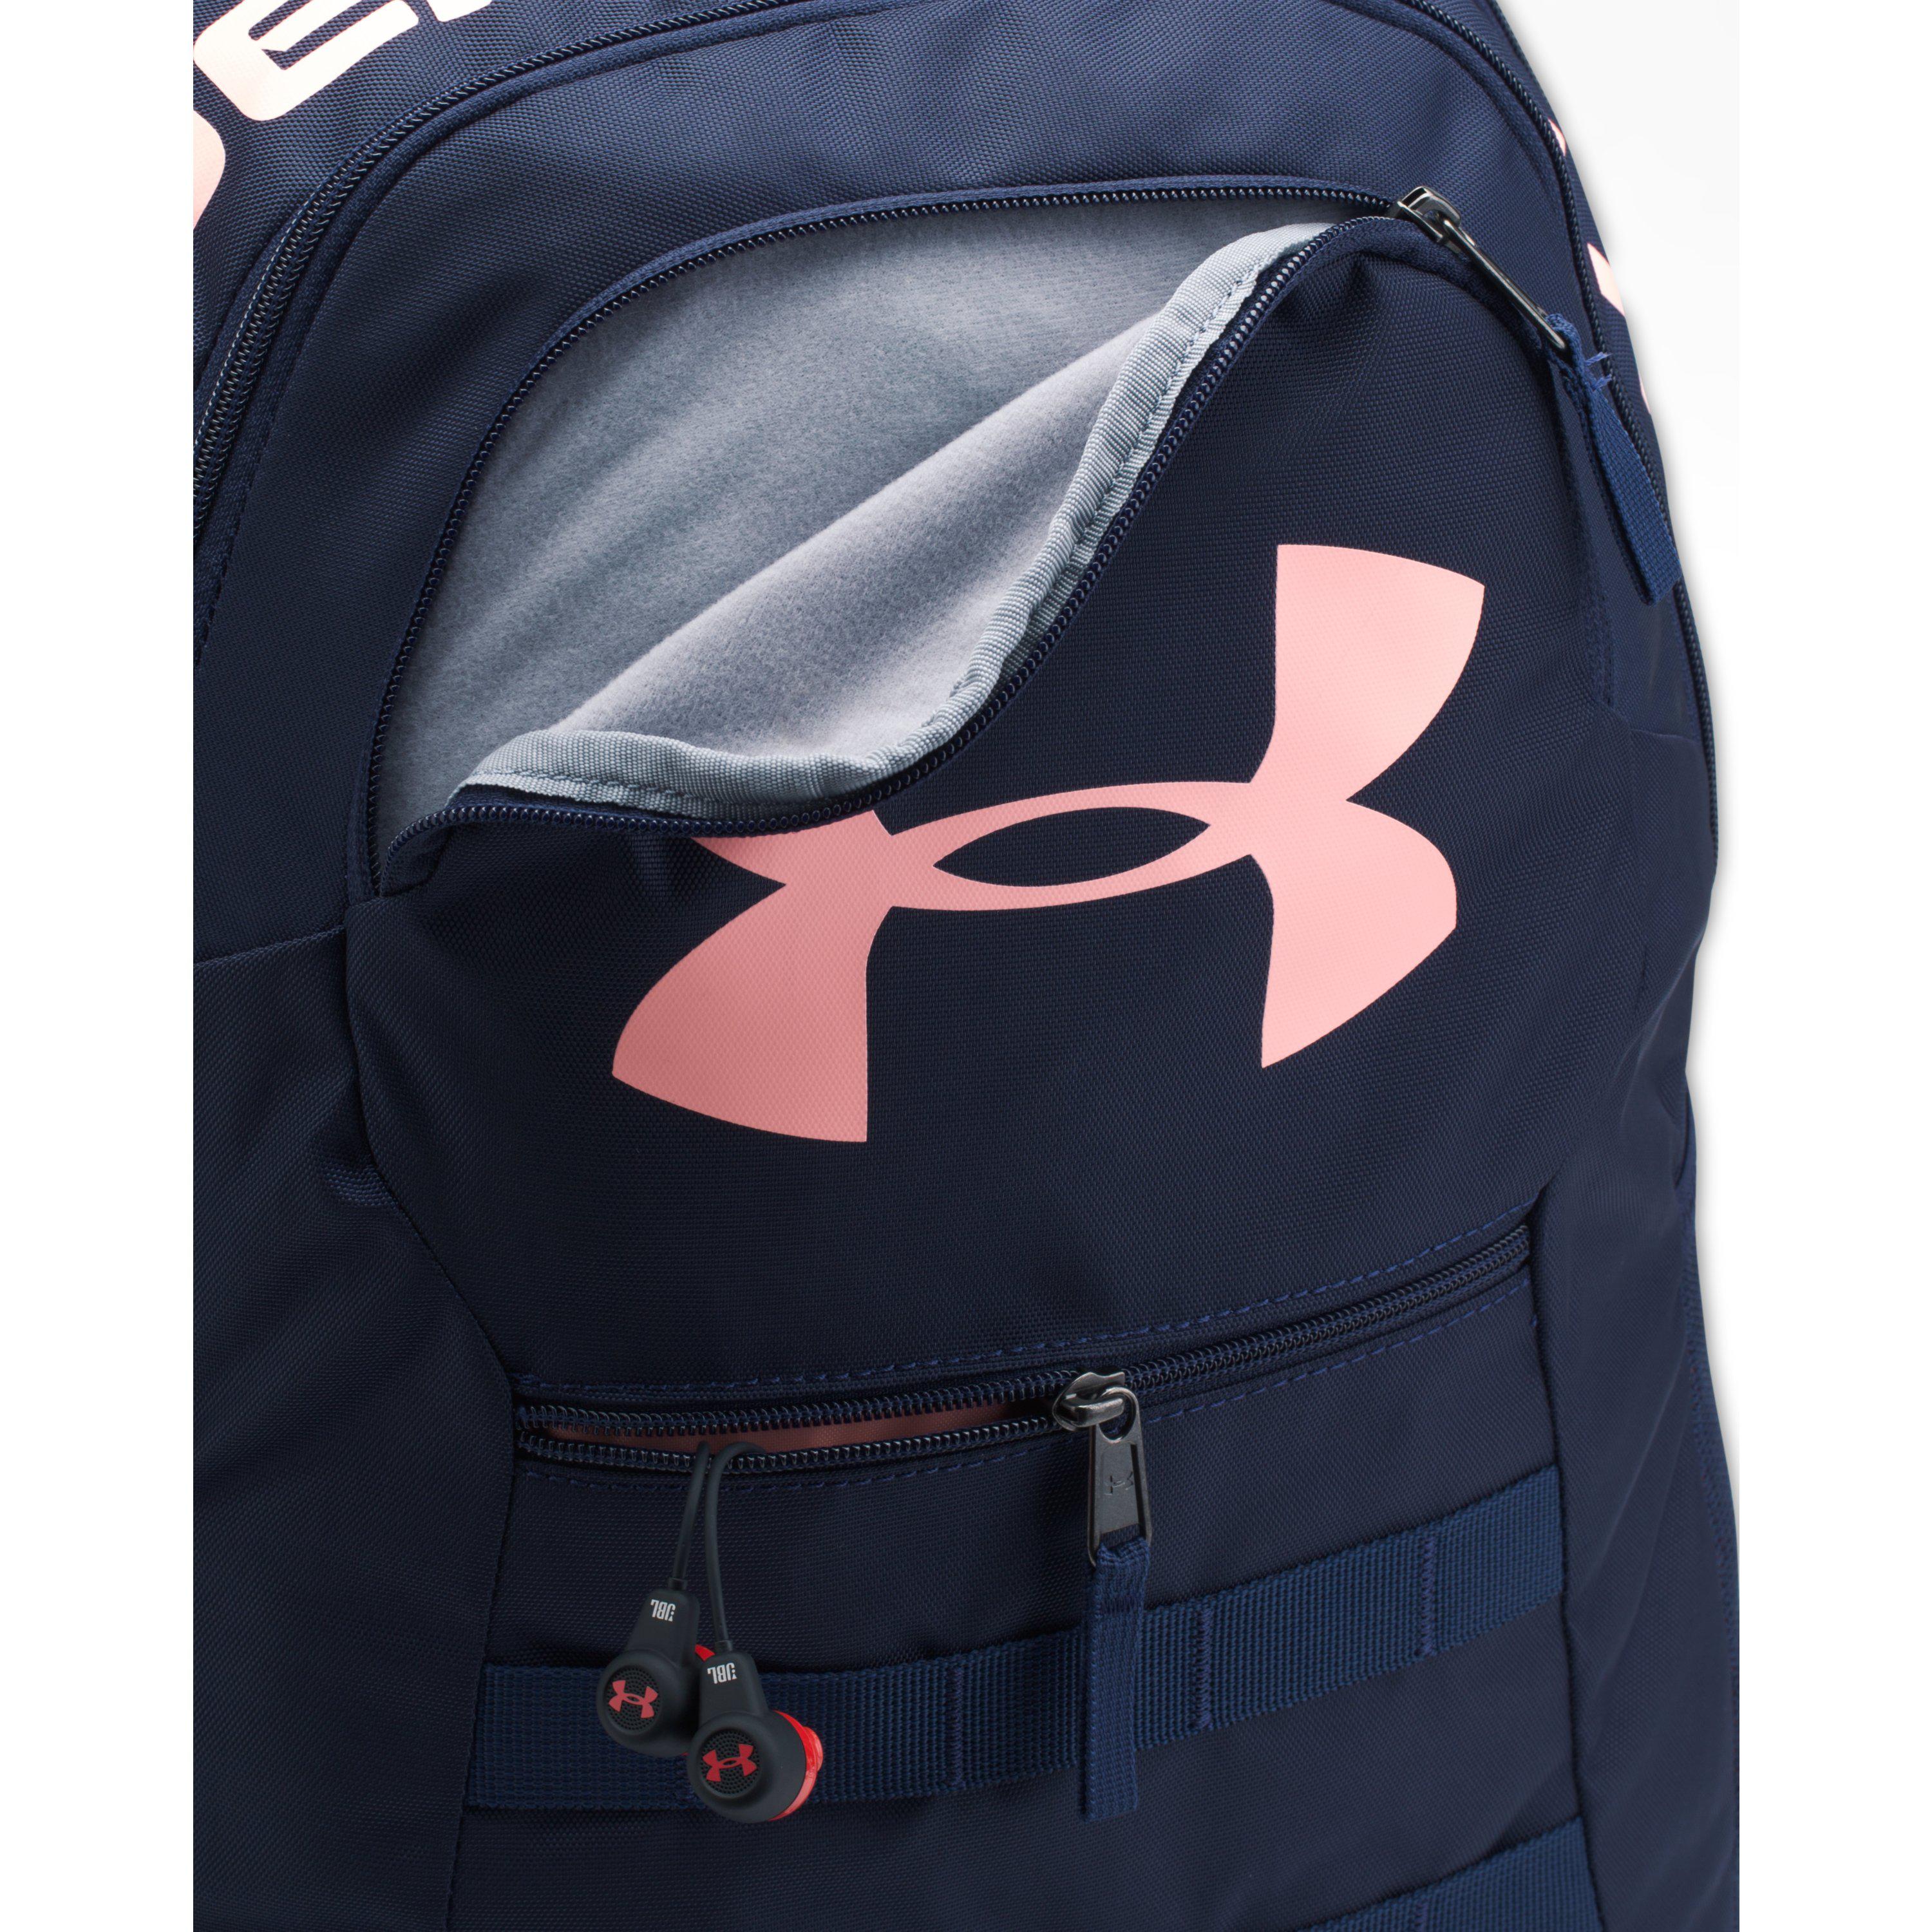 navy under armour backpack